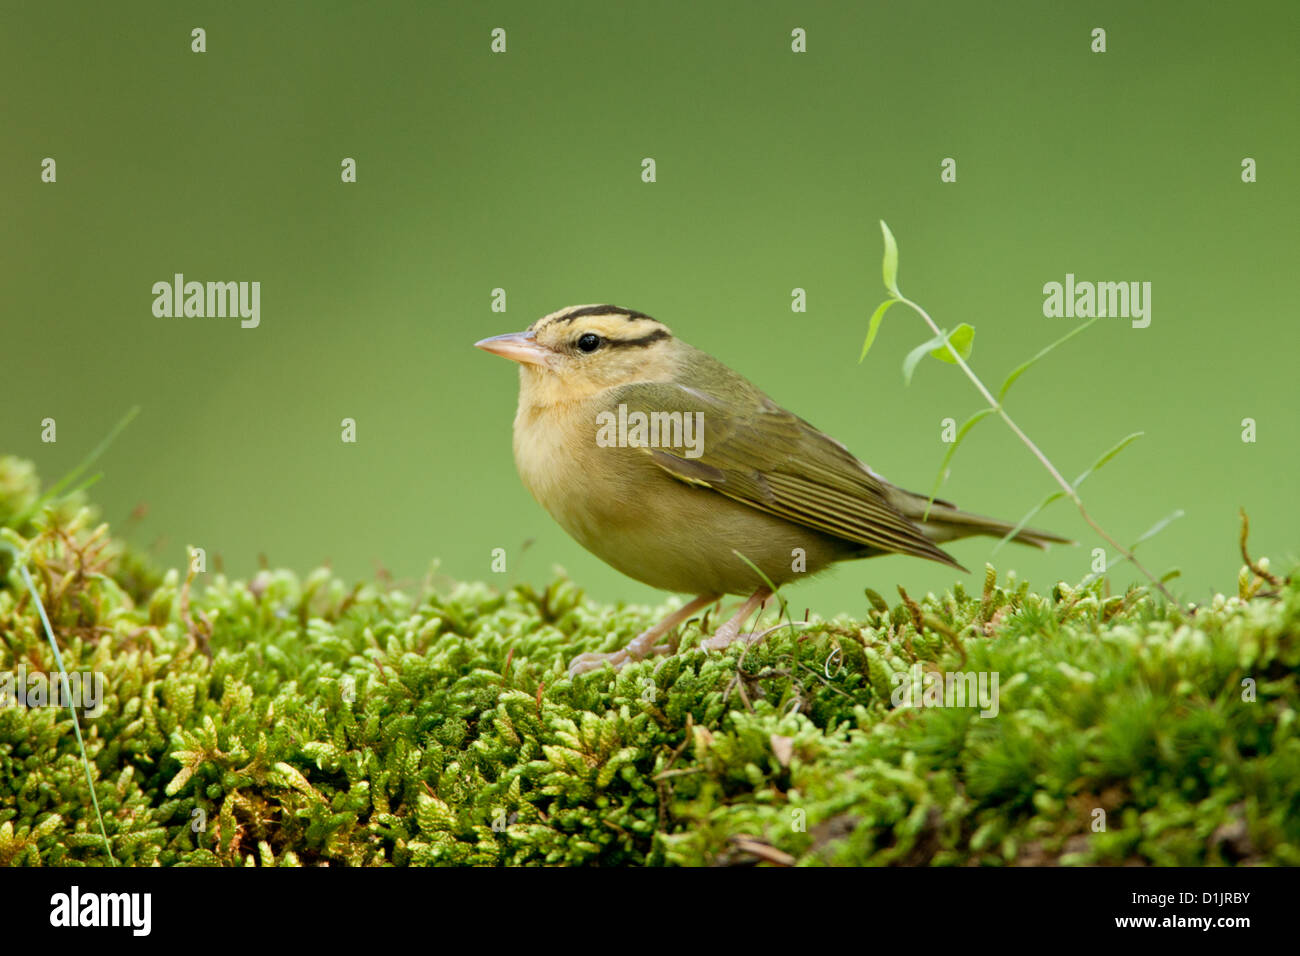 Verme-eating Warbler su muschio covered log uccelli songbird songbirds Ornitologia Scienza natura natura natura ambiente Warblers Foto Stock